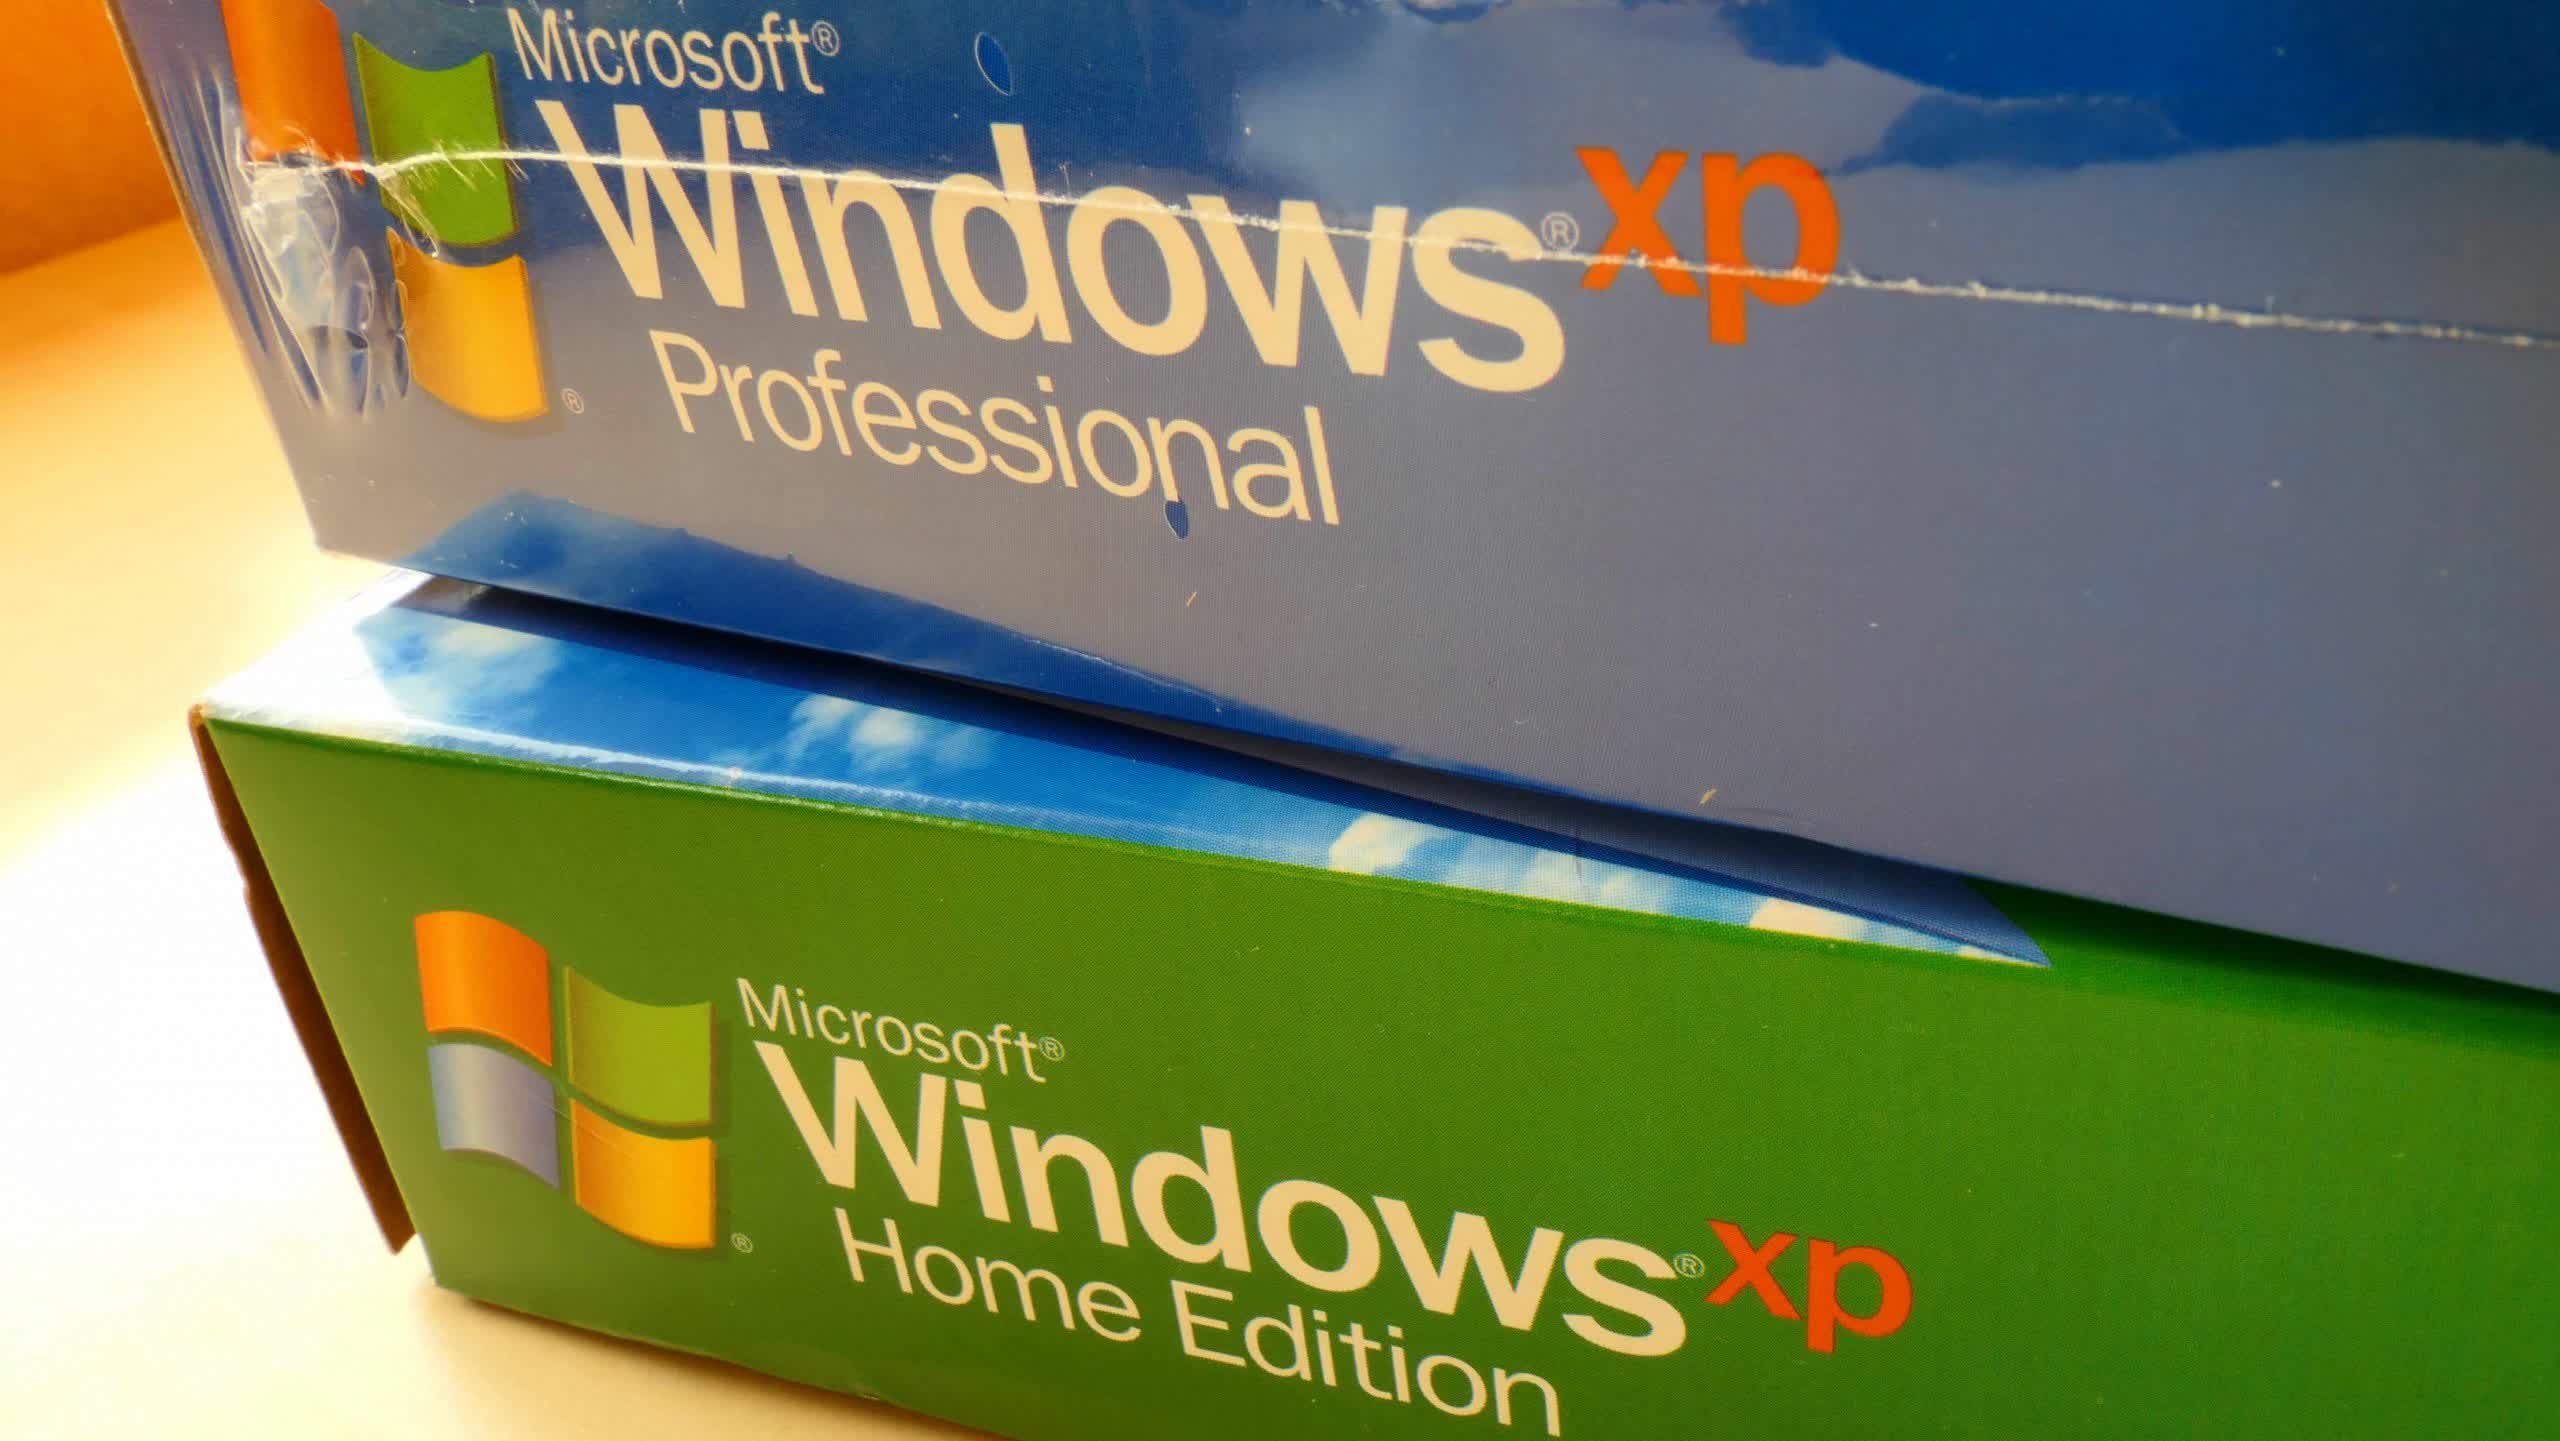 Dangerous nostalgia: Taking Windows XP online will result in auto-installed viruses in a matter of minutes